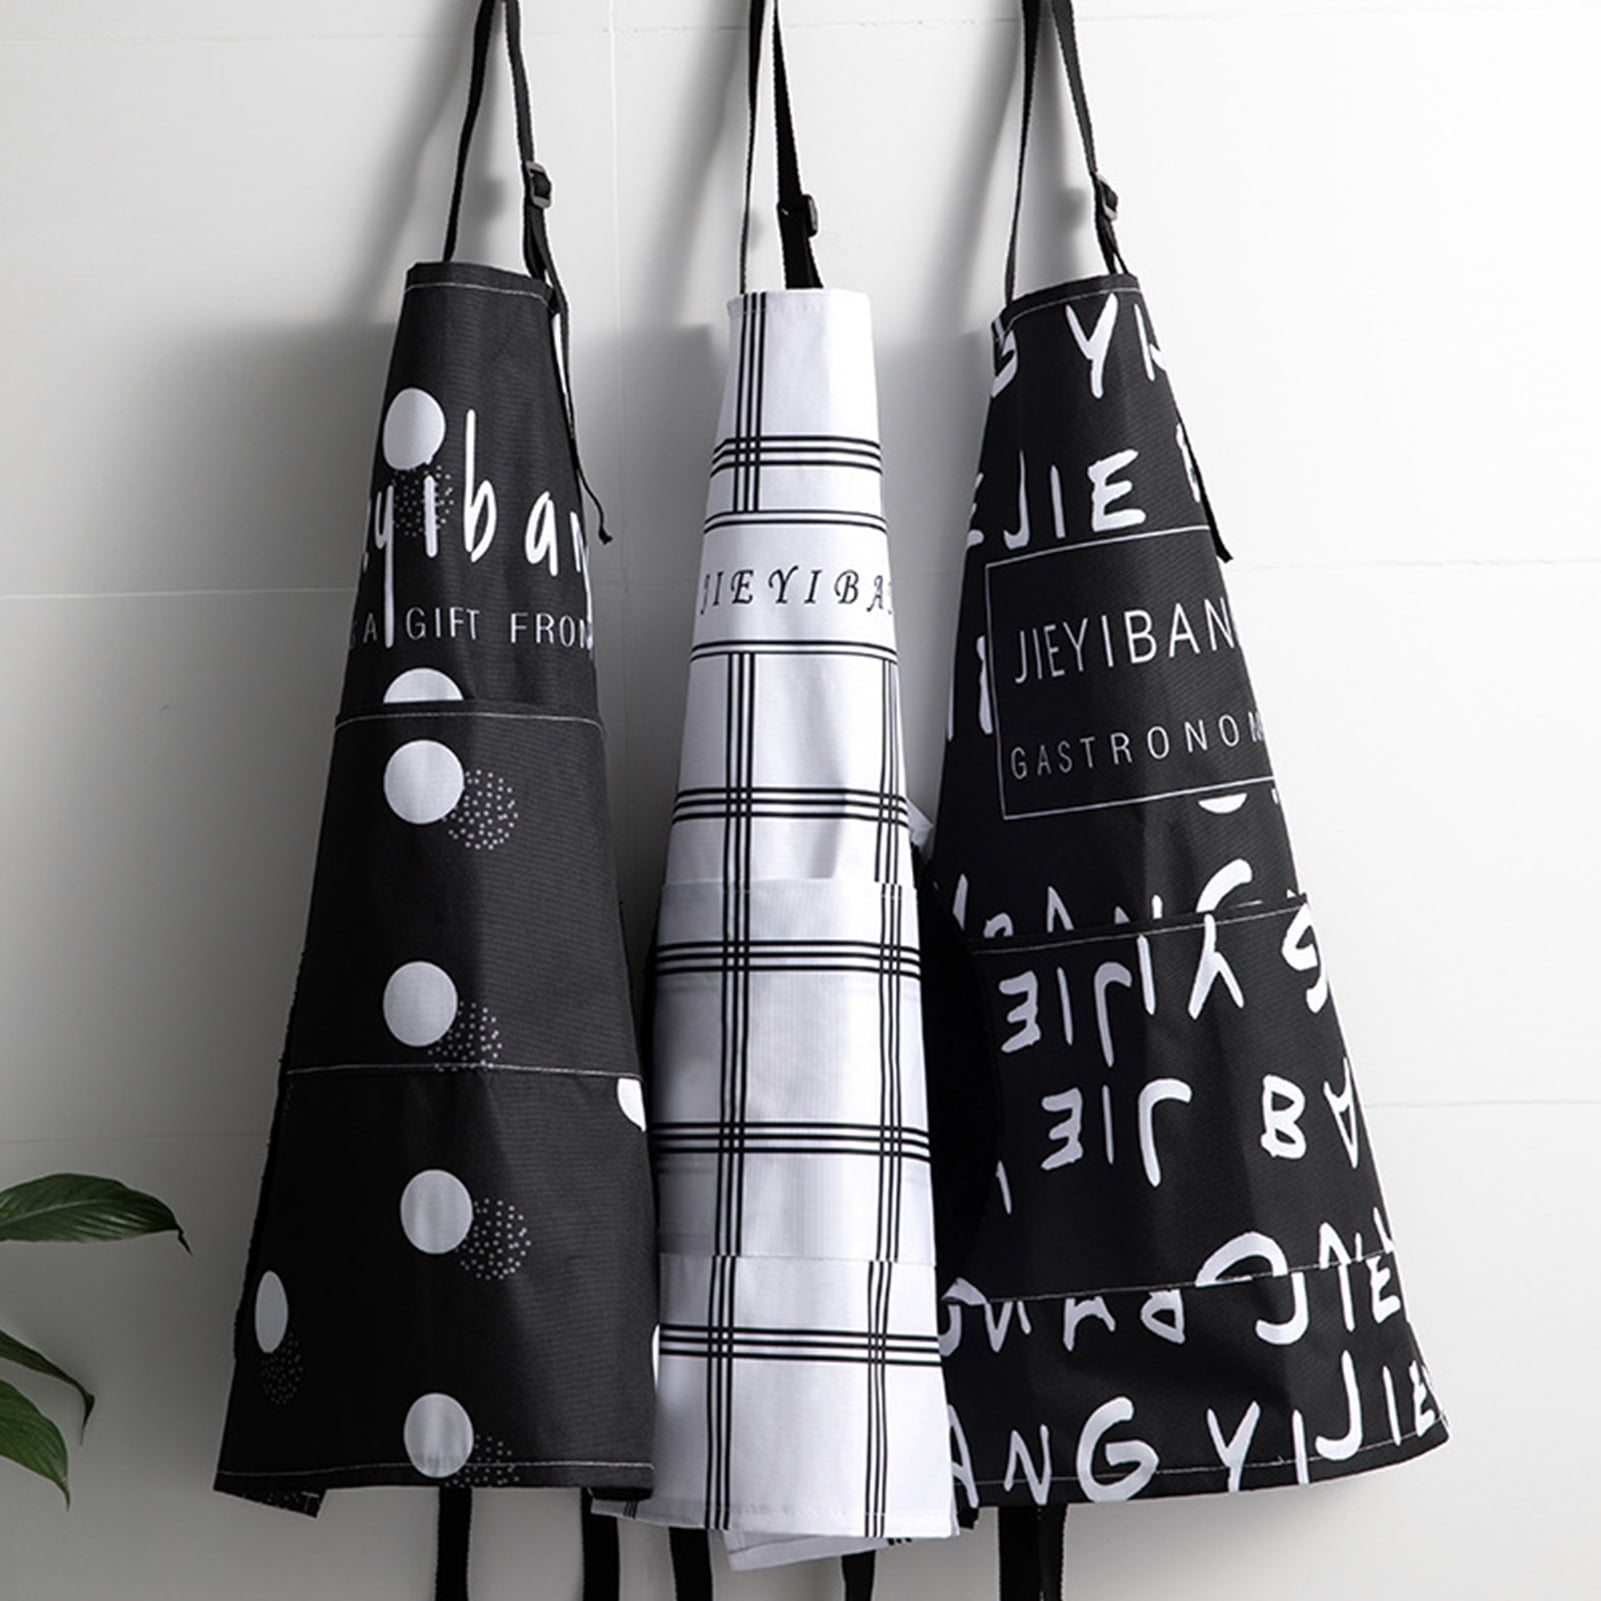 Yiba Made Aprons for Women Men Black Kitchen Aprons with 2 Pockets Durable Personalized Aprons for BBQ Kitchen Cooking Baking Crafting Restaurant Full Adult Size 2 Pack 